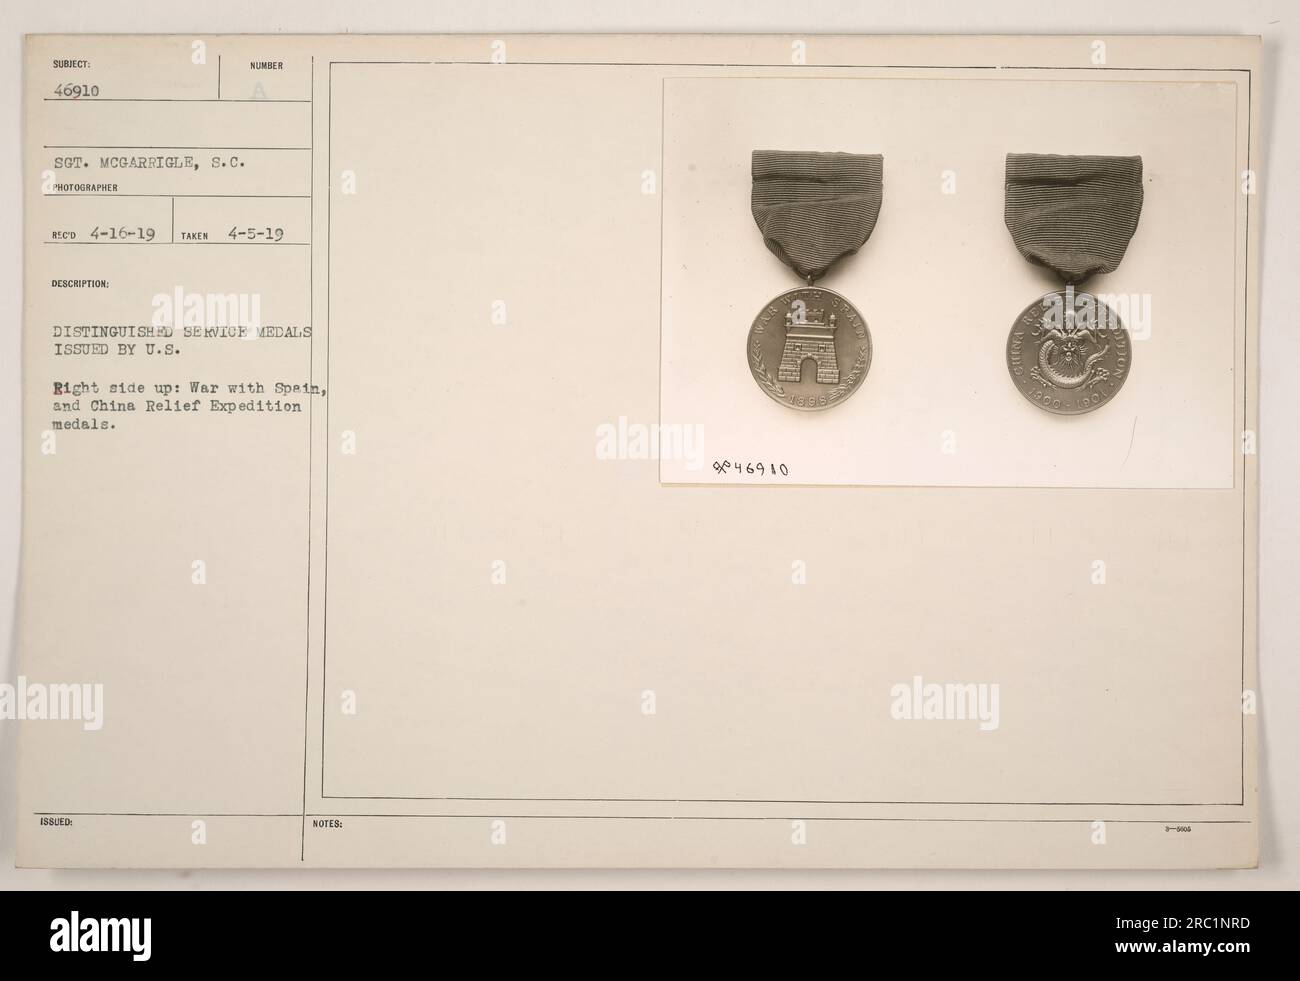 The photograph shows a close-up of two distinguished service medals issued by the U.S. military. The first medal is for the War with Spain and the second medal is for the China Relief Expedition. The medals are numbered, with the notation '946910' indicating their identification. The photograph was taken on April 5, 1919, by photographer S.C. McGarrigle, and it was later recorded in the photographer's records on April 16, 1919. Stock Photo